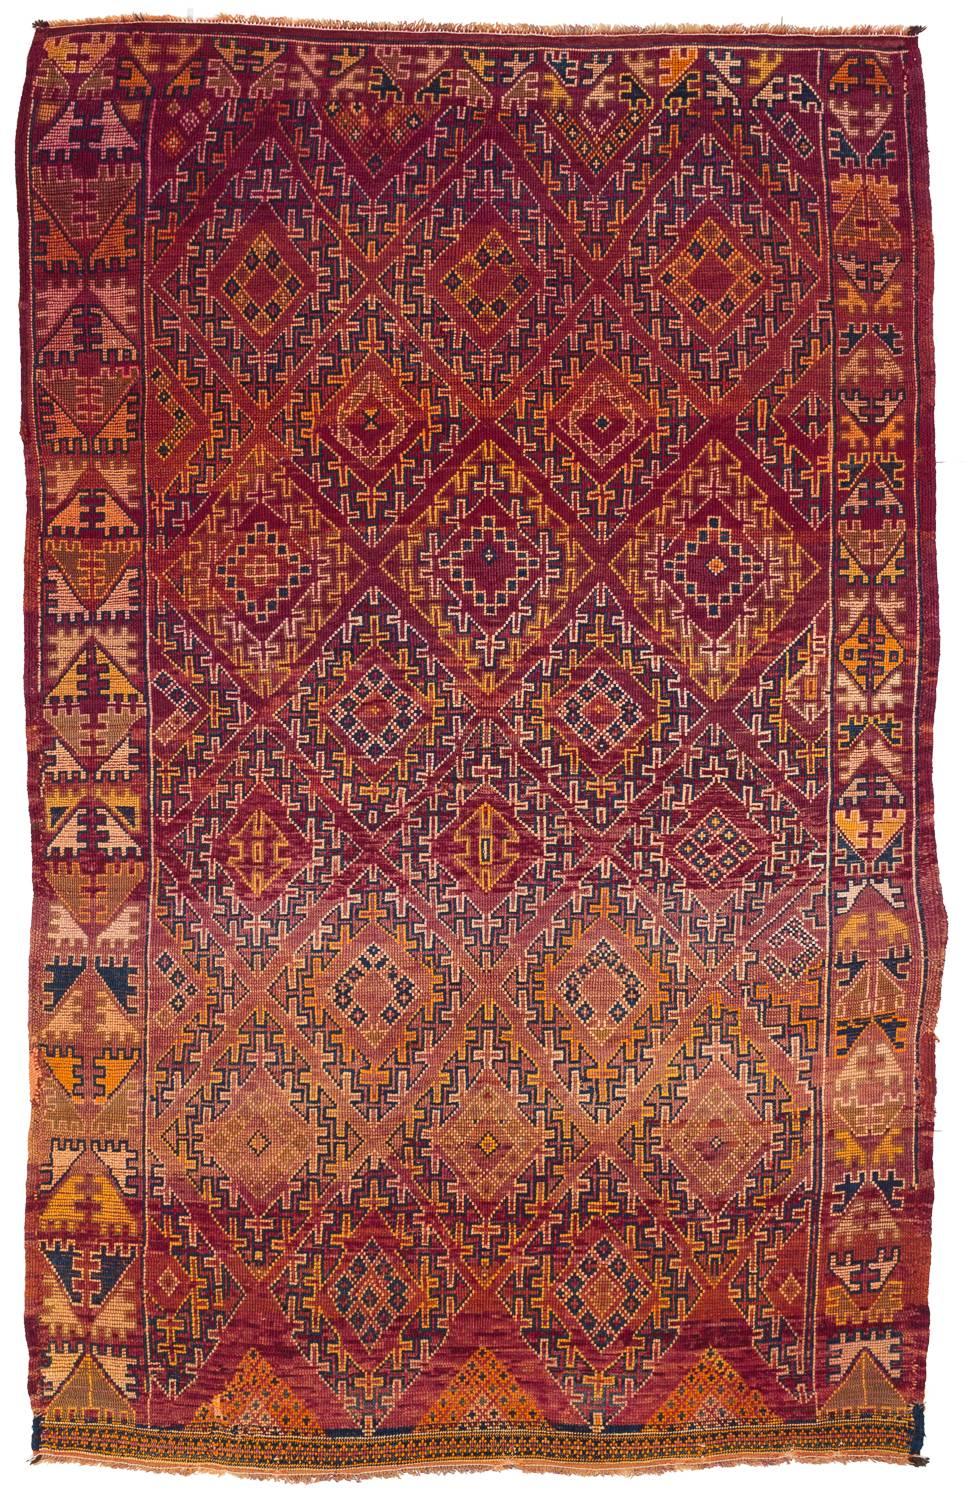 This Moroccan rug is in next to perfect condition, the finest and most elegant one from this origin. This rug is really stellar- color, design, and high quality Berber wool, it has it all!